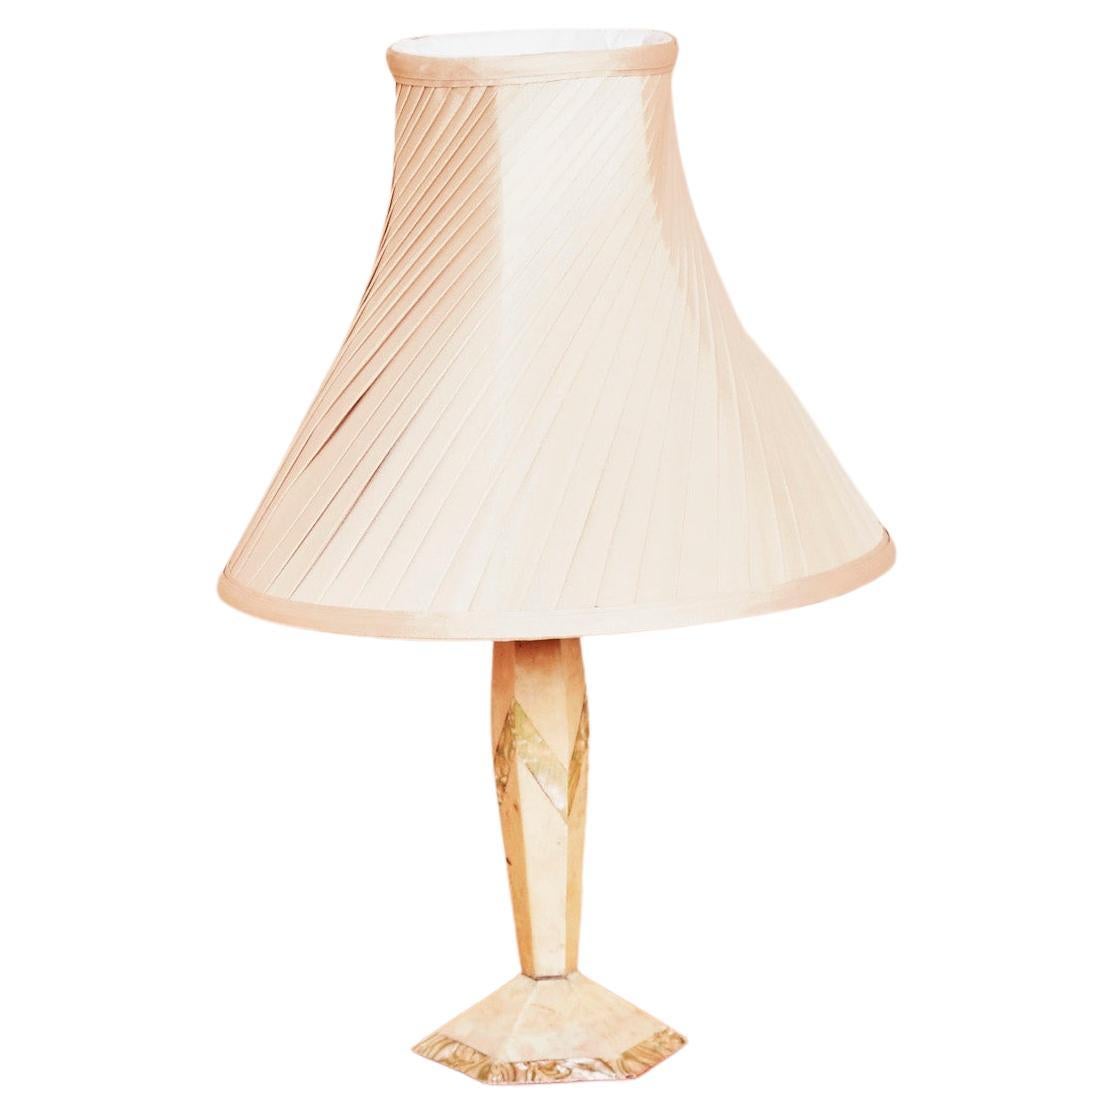 Art Deco Table Lamp With Mother Of Pearl Inlay And Pleated Shade, 1930s